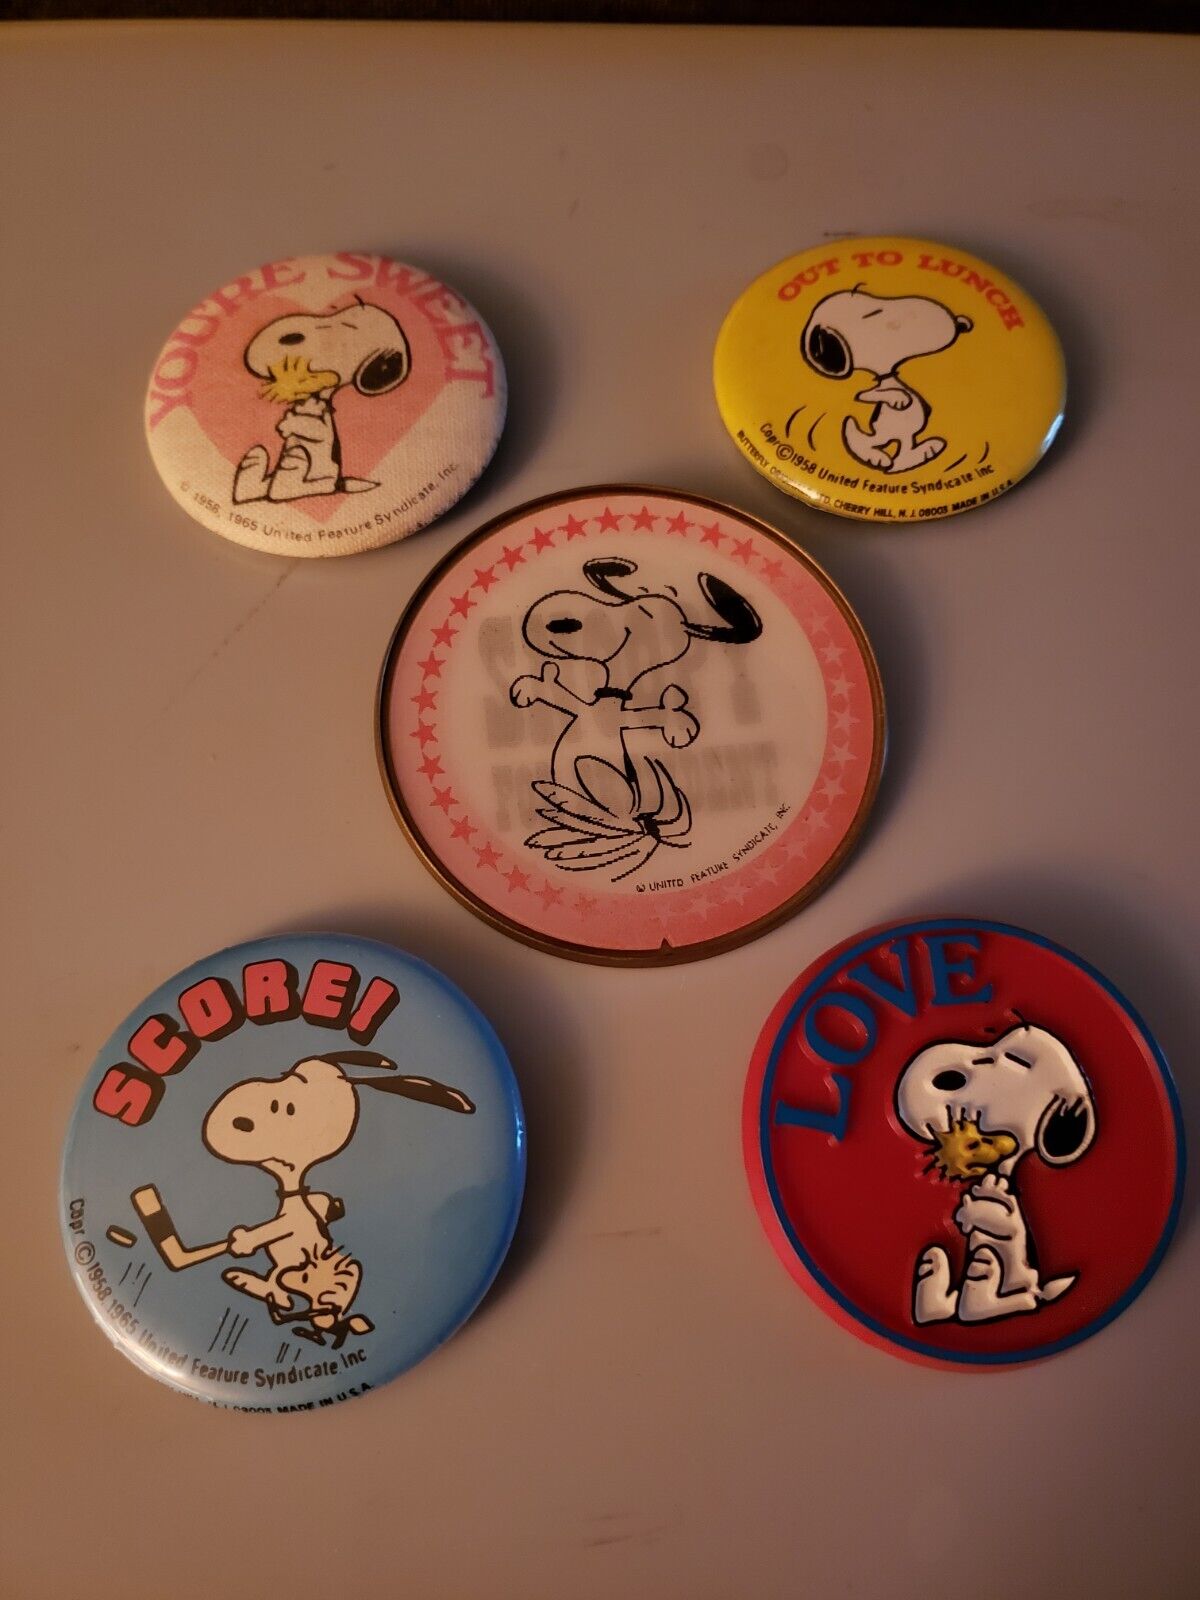 1958 1965 Snoopy United Feature Syndicate 5 Pin Back Buttons Peanuts Hallmark 